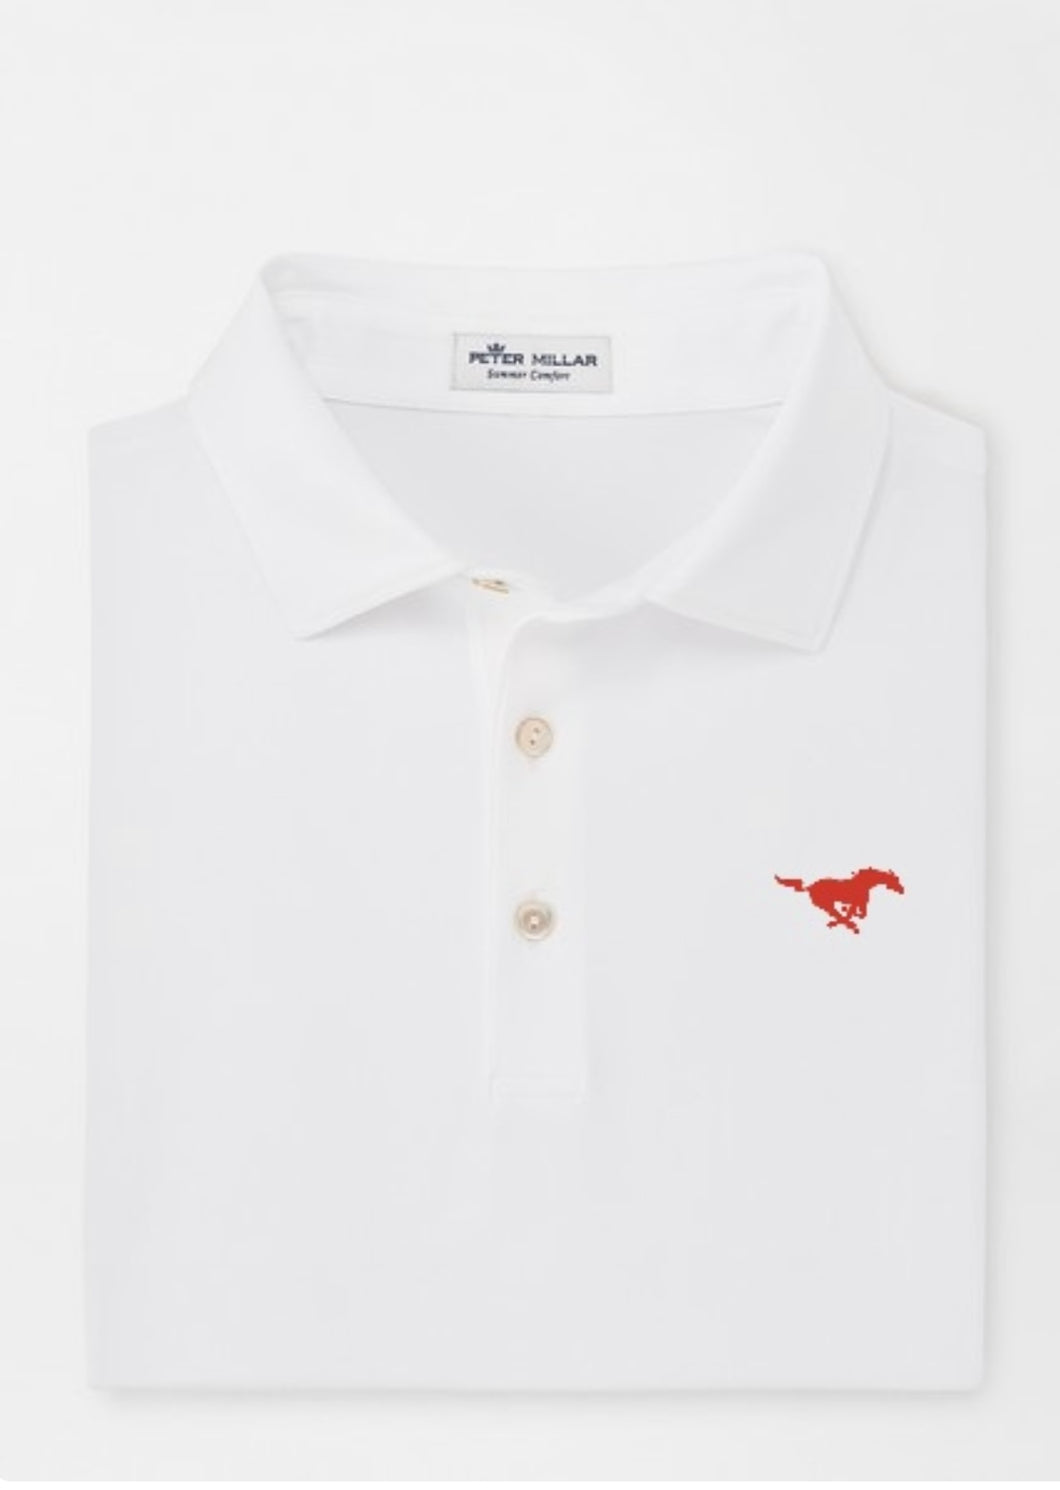 Peter Millar Men's White Solid Stretch Mesh Polo